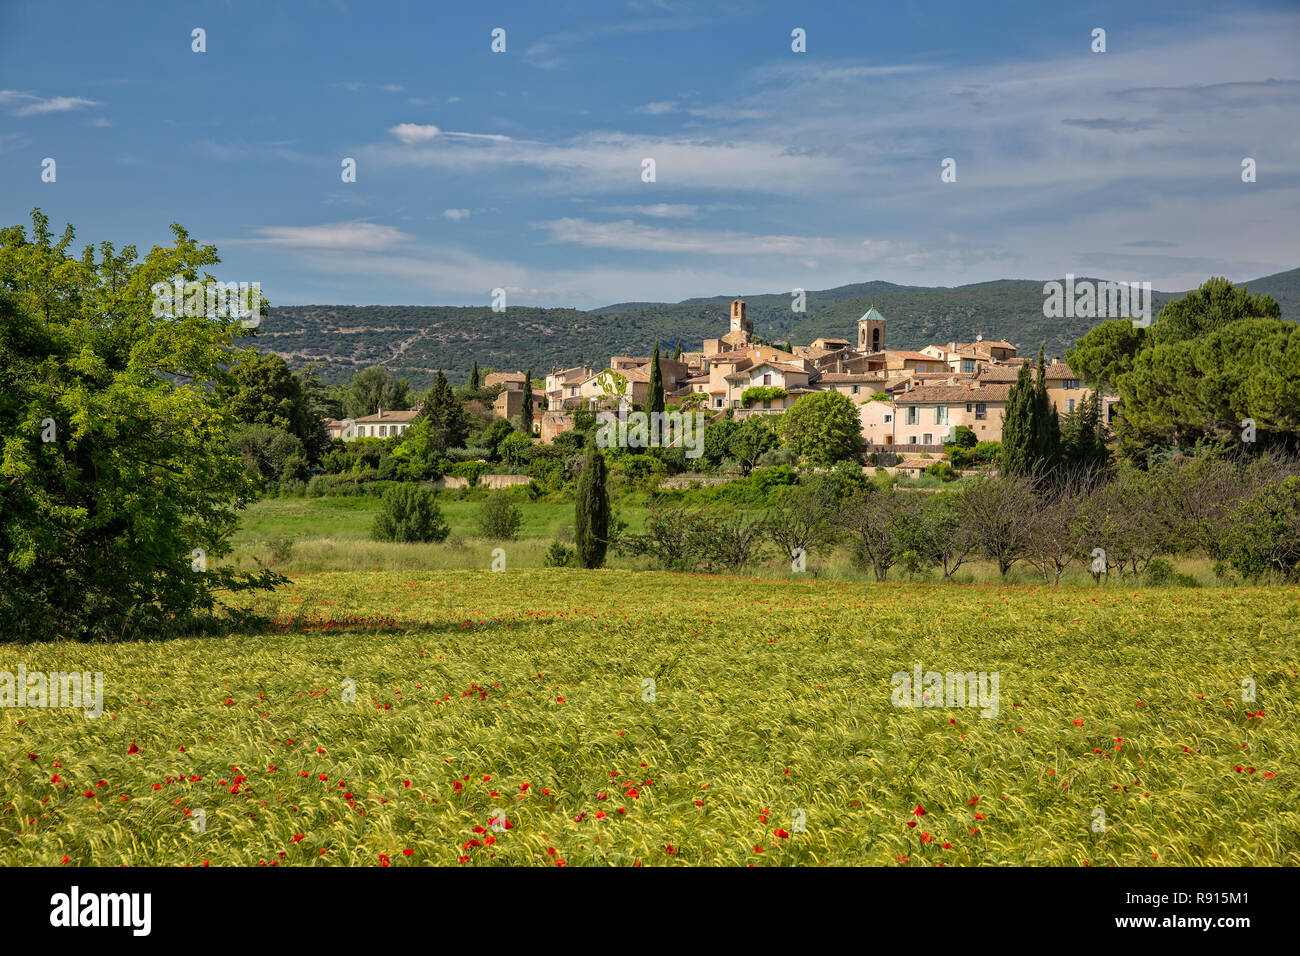 Lourmarin, a small village in the Luberon. Field of wheat and poppies with view of the idyllic village Lourmarin, Provence, Luberon, Vaucluse, France Stock Photo